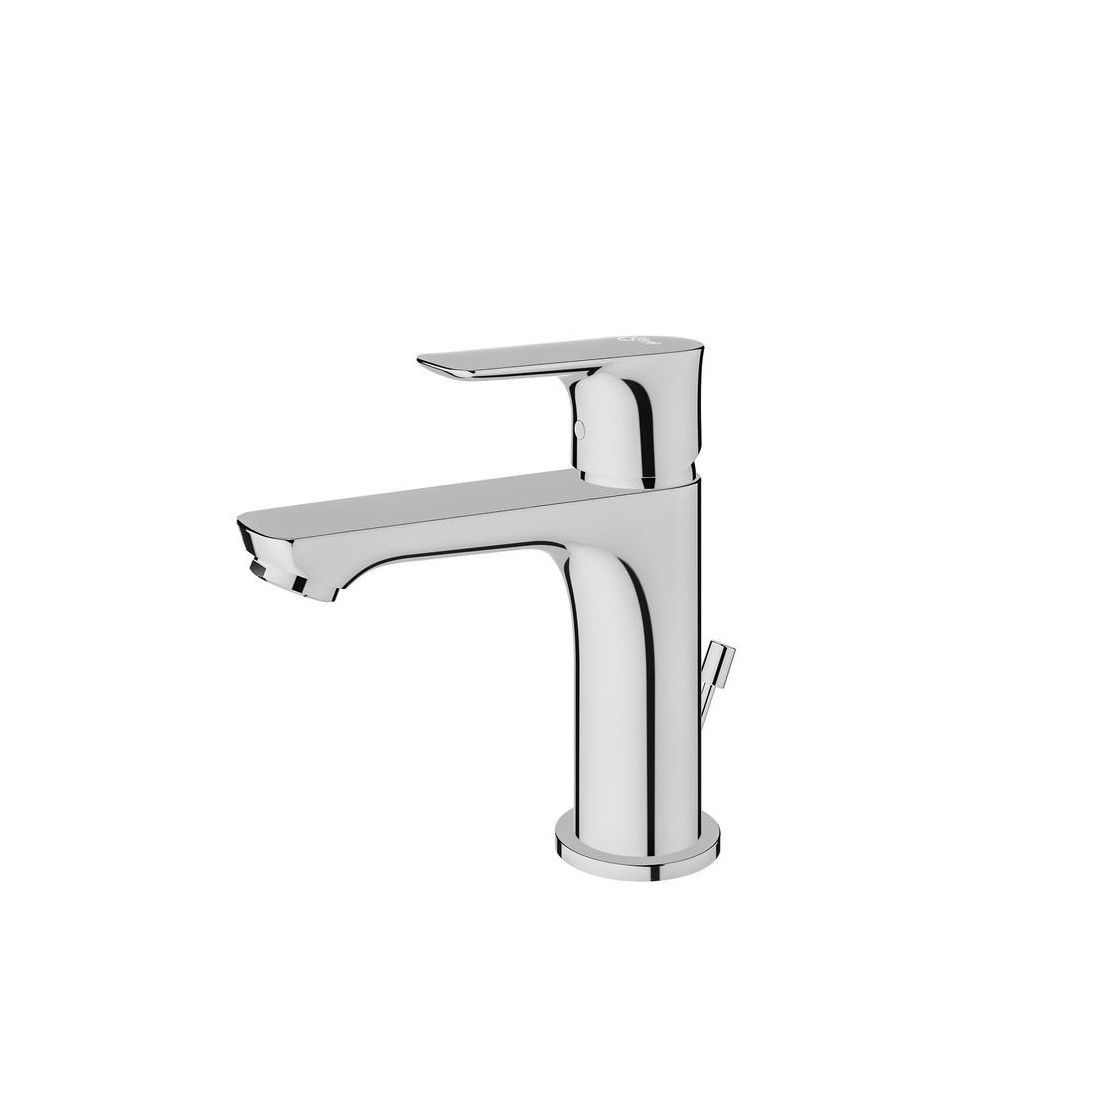 IDEAL STANDARD - MISCELATORE RUBINETTO LAVABO CONNECT AIR A7012AA